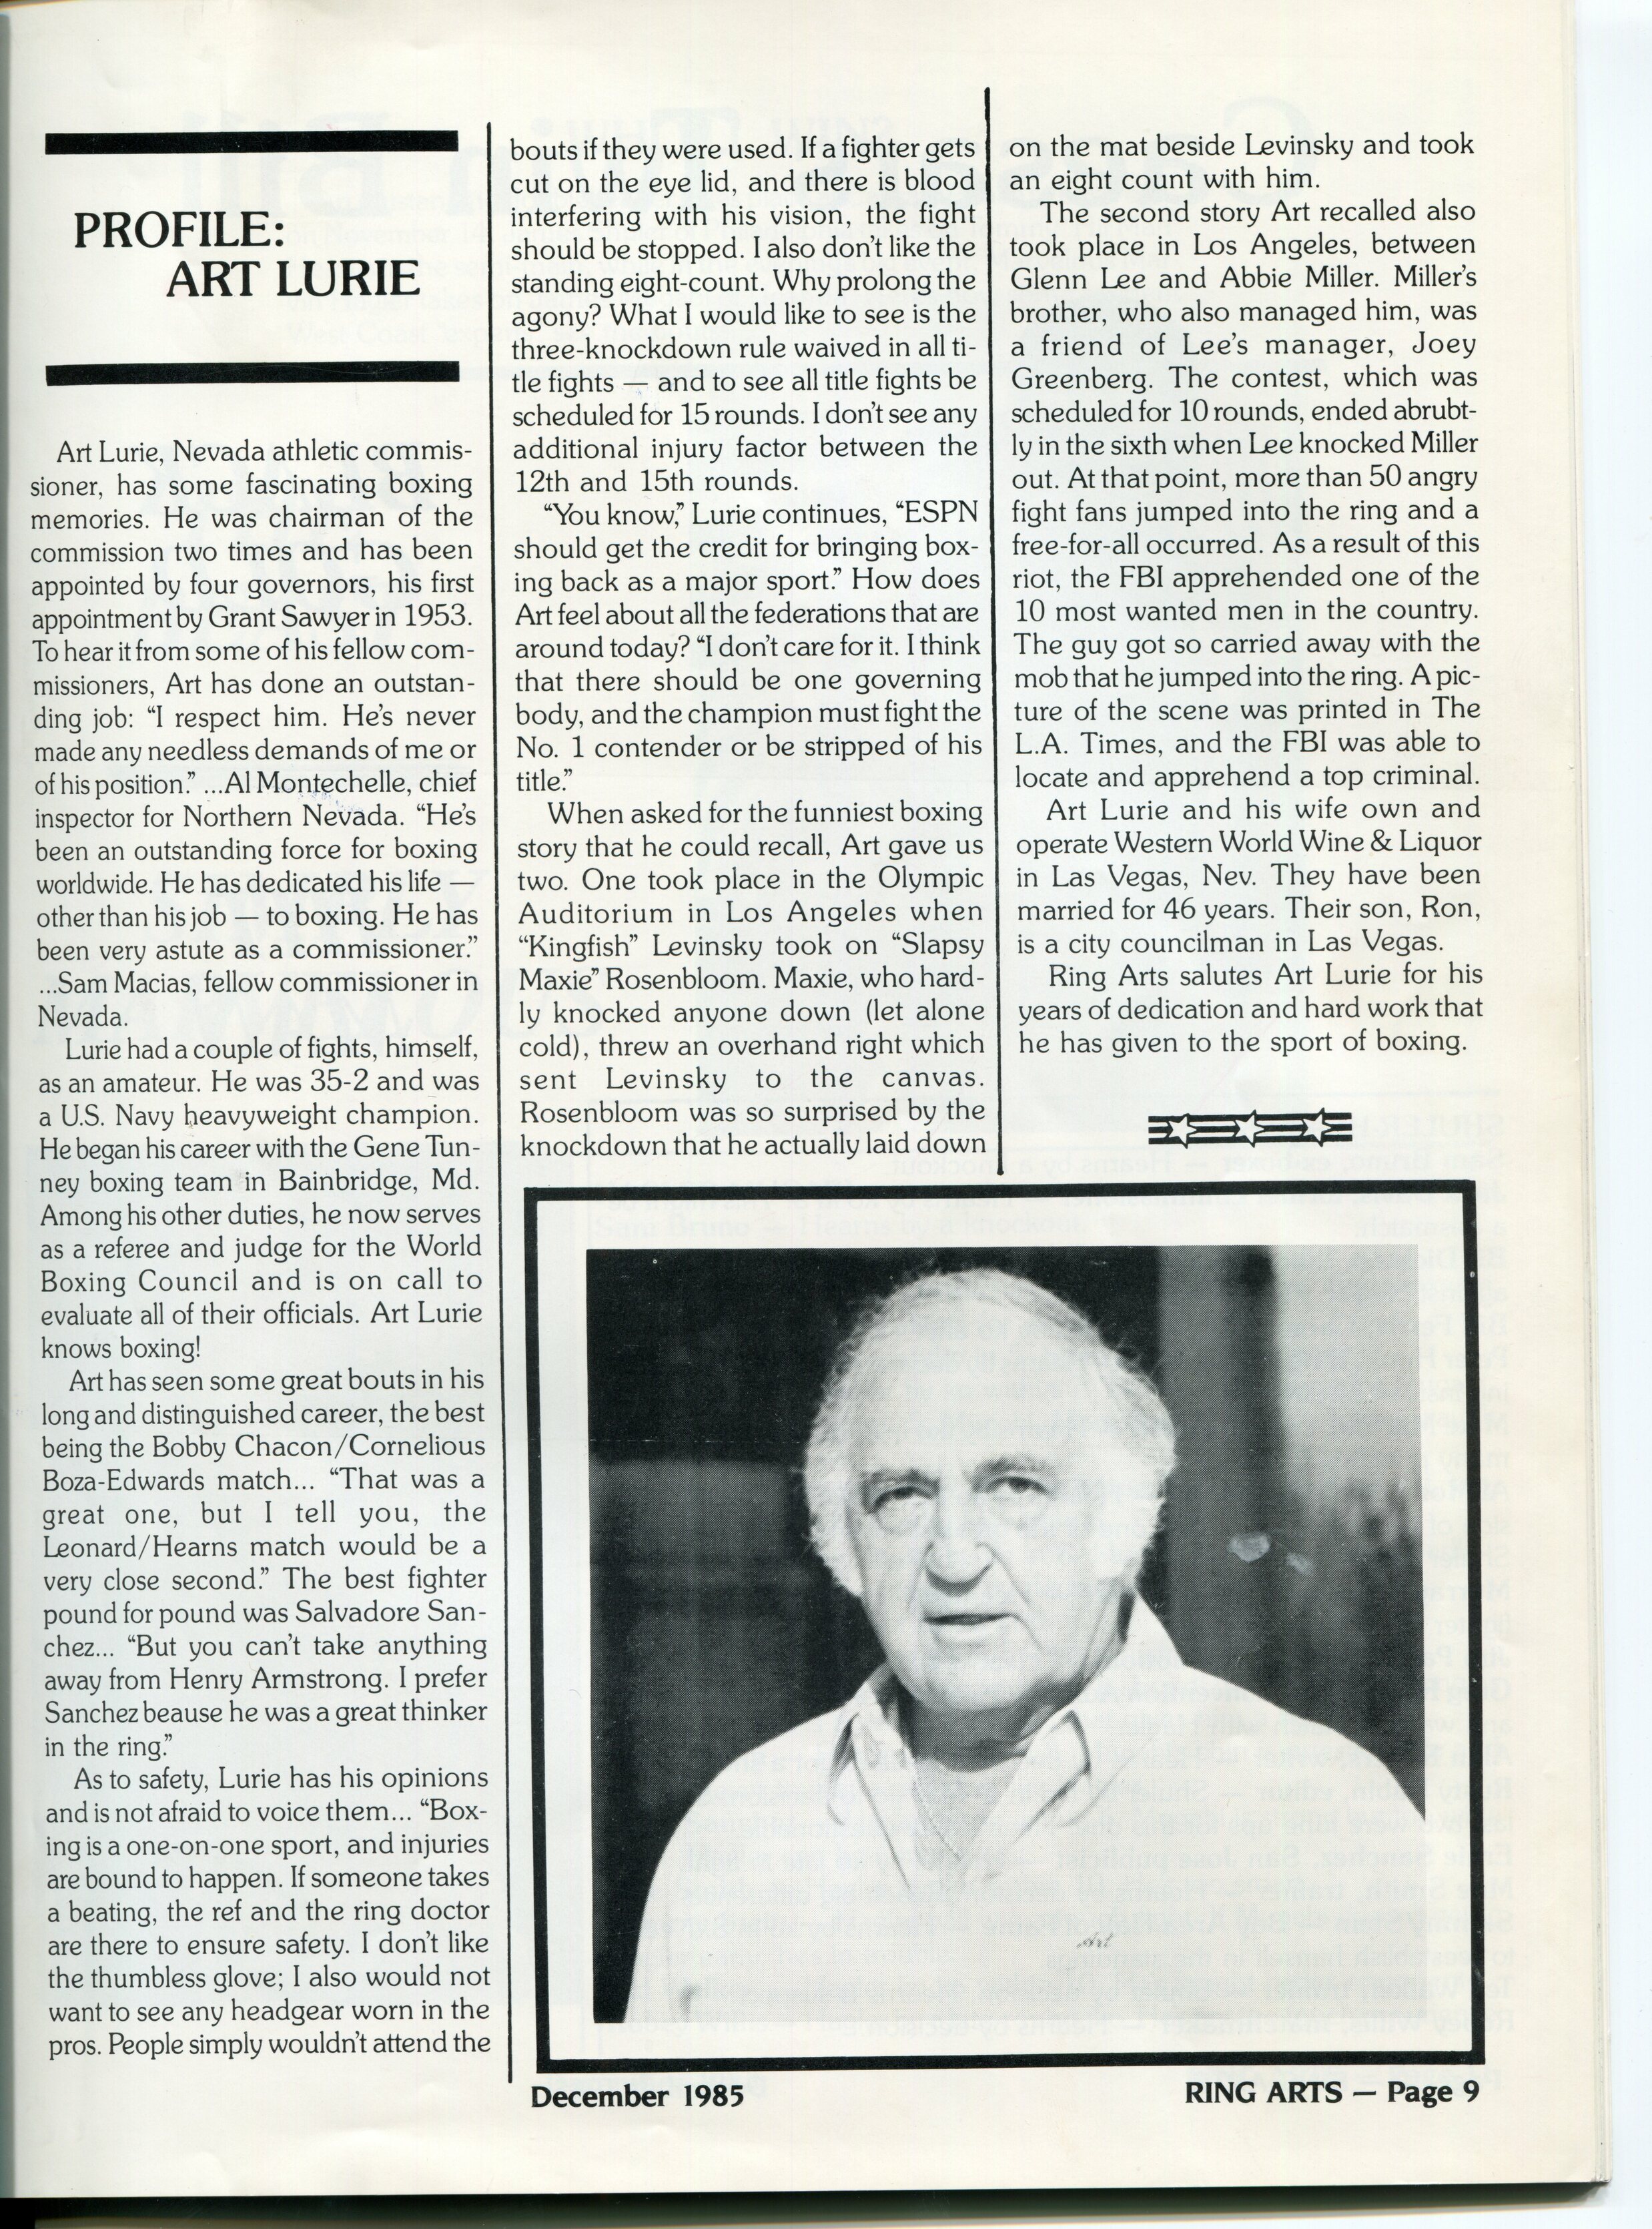 Photographs and profile of Art Lurie, image 01